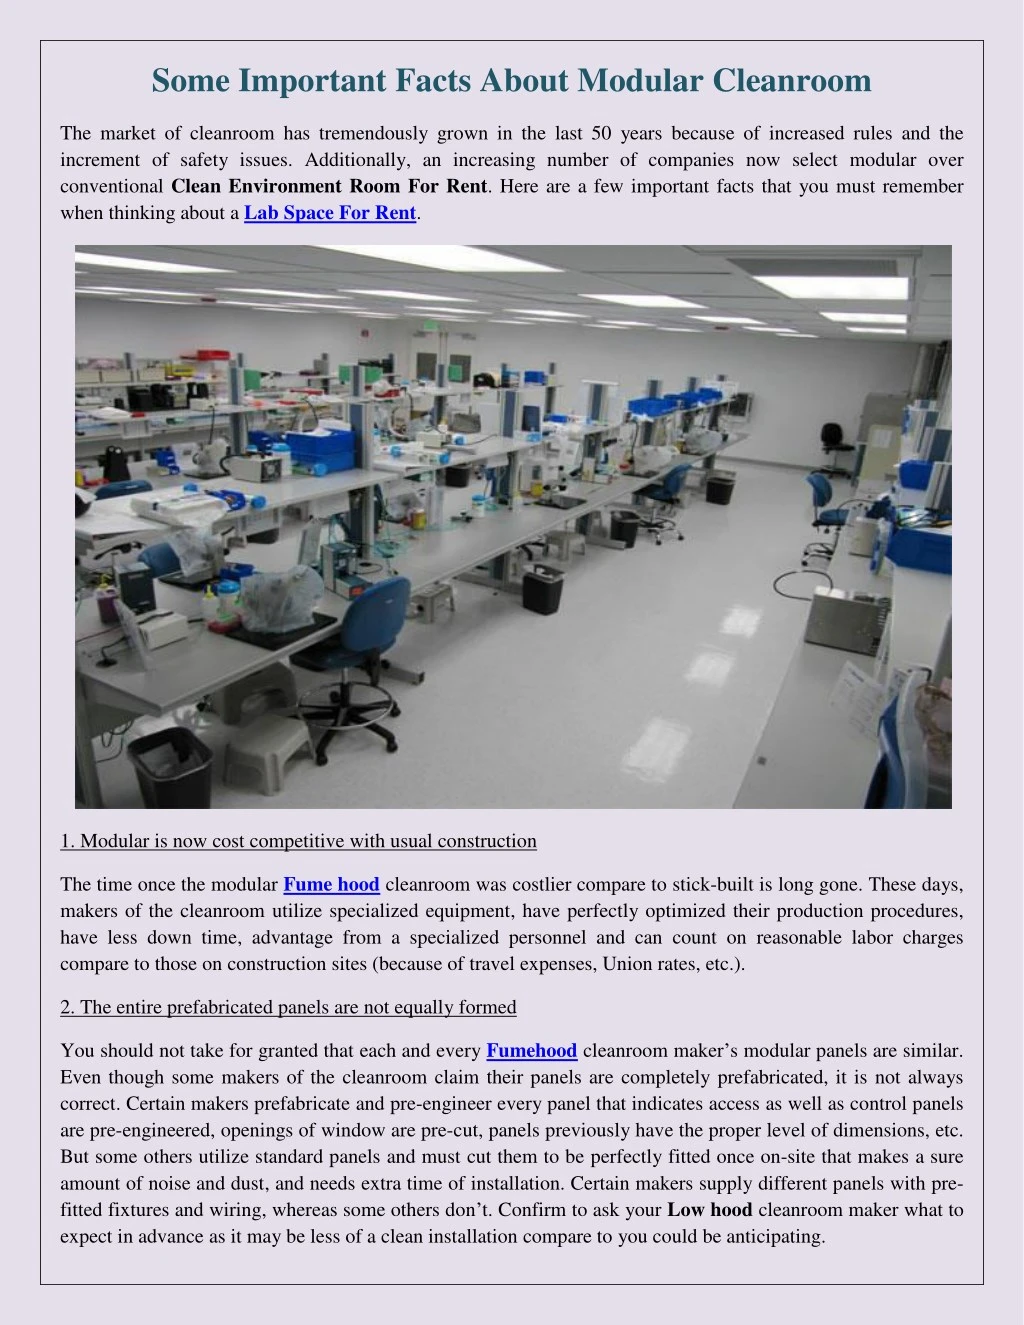 some important facts about modular cleanroom